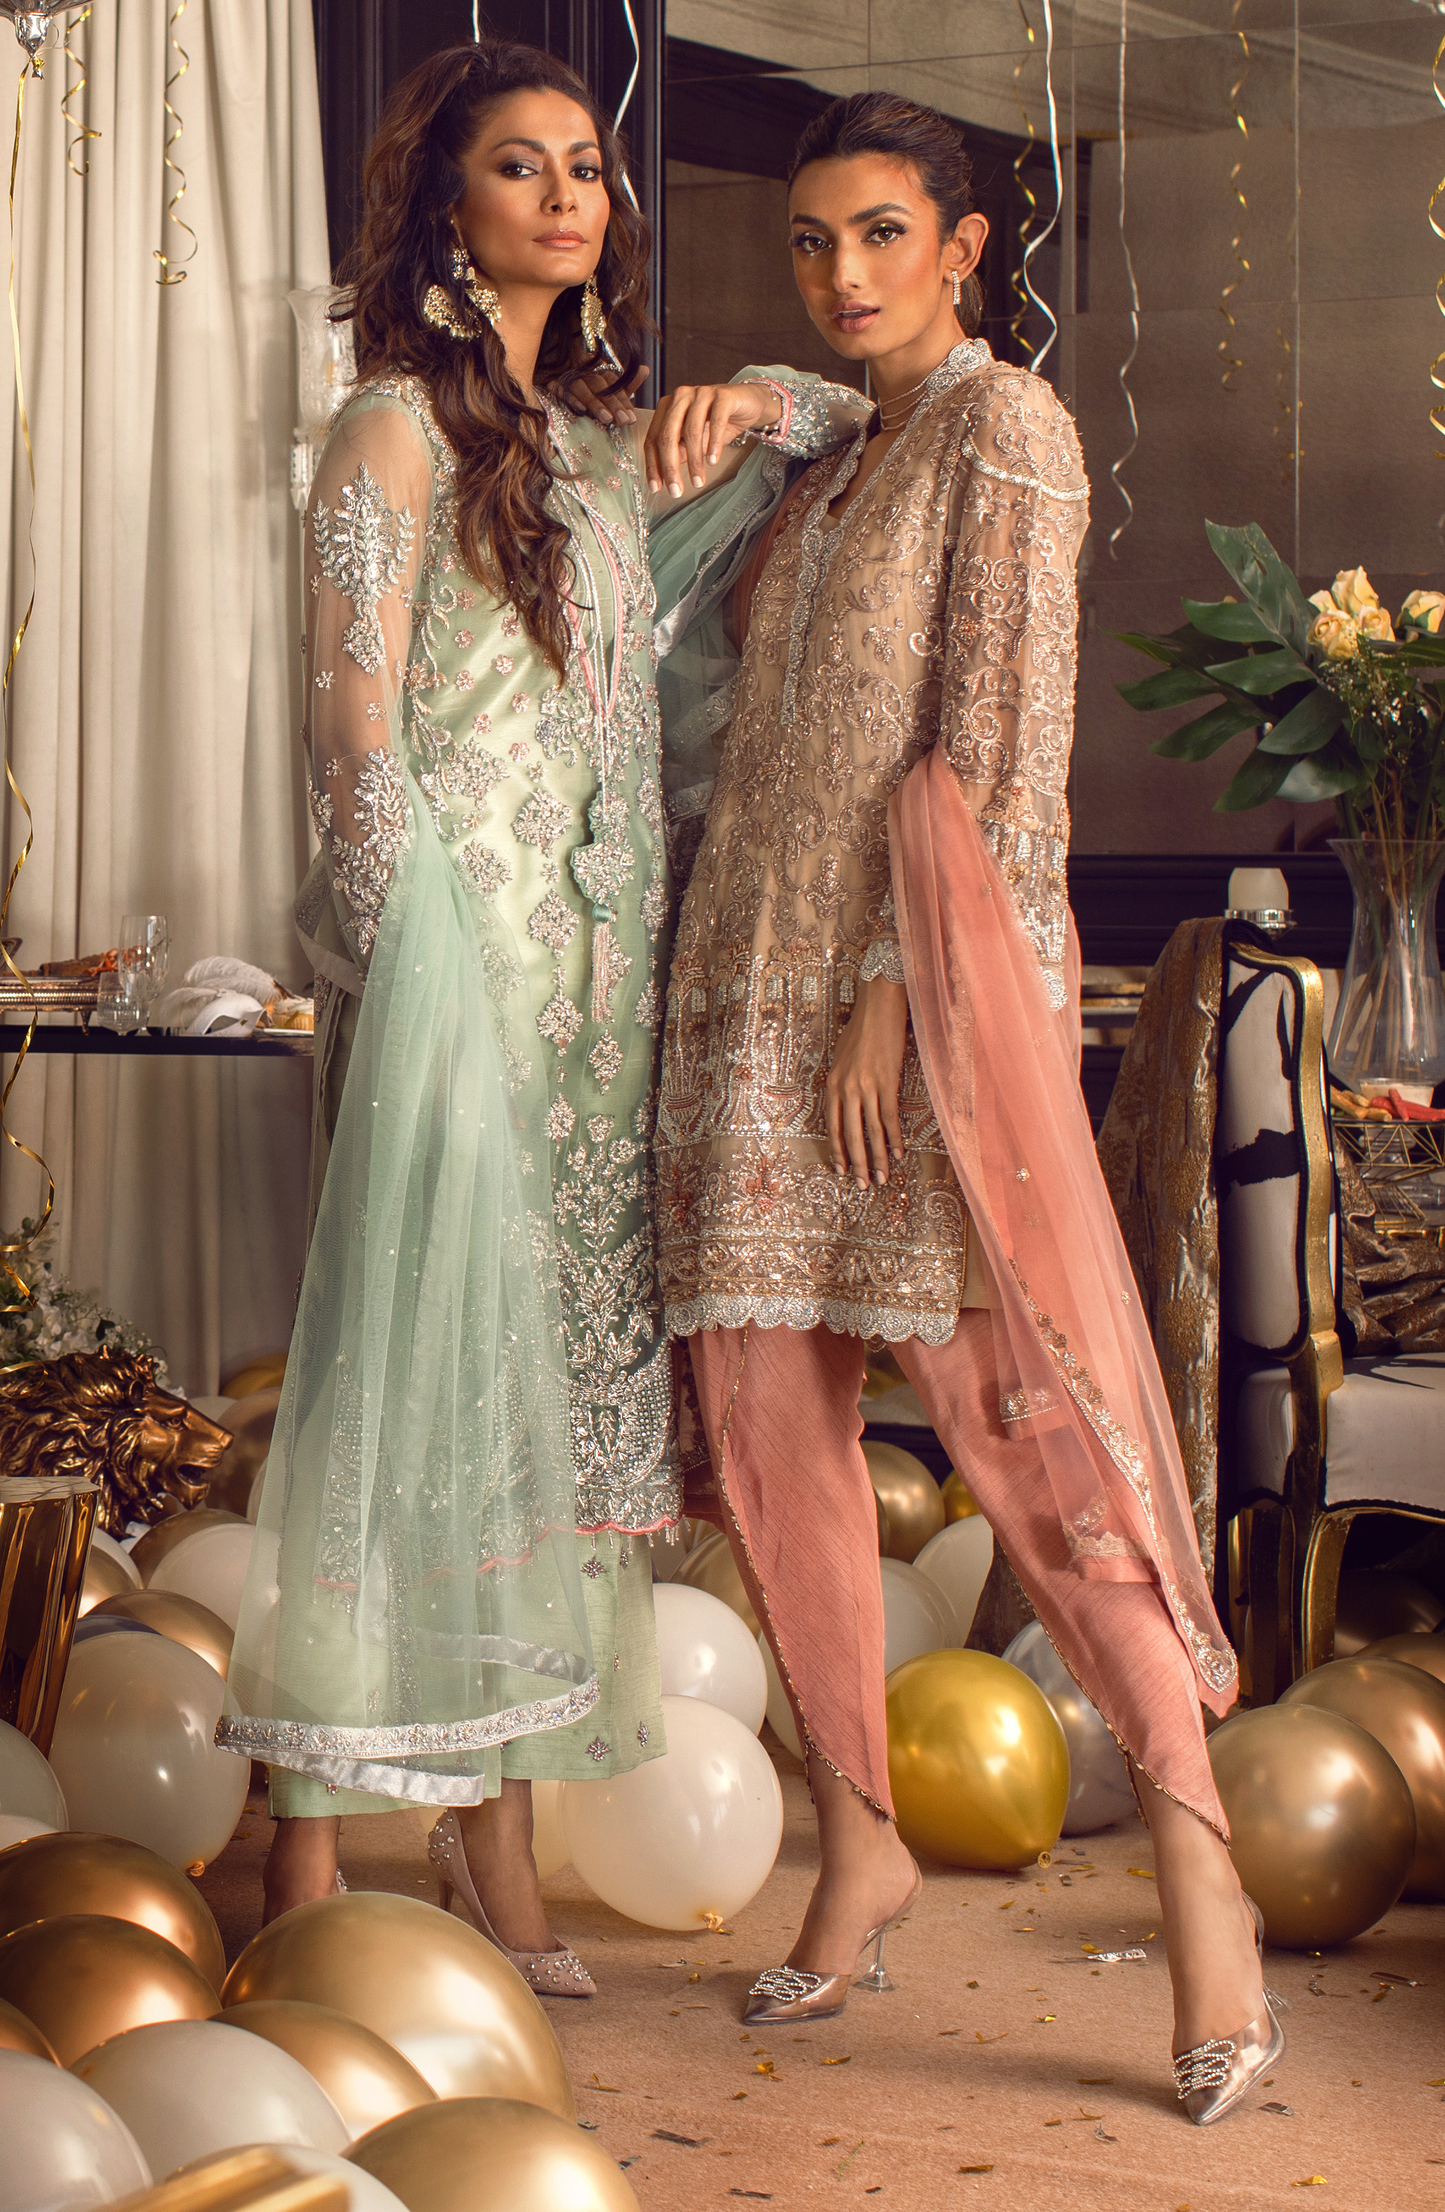 HSY Luxury party dresses from Pakistan